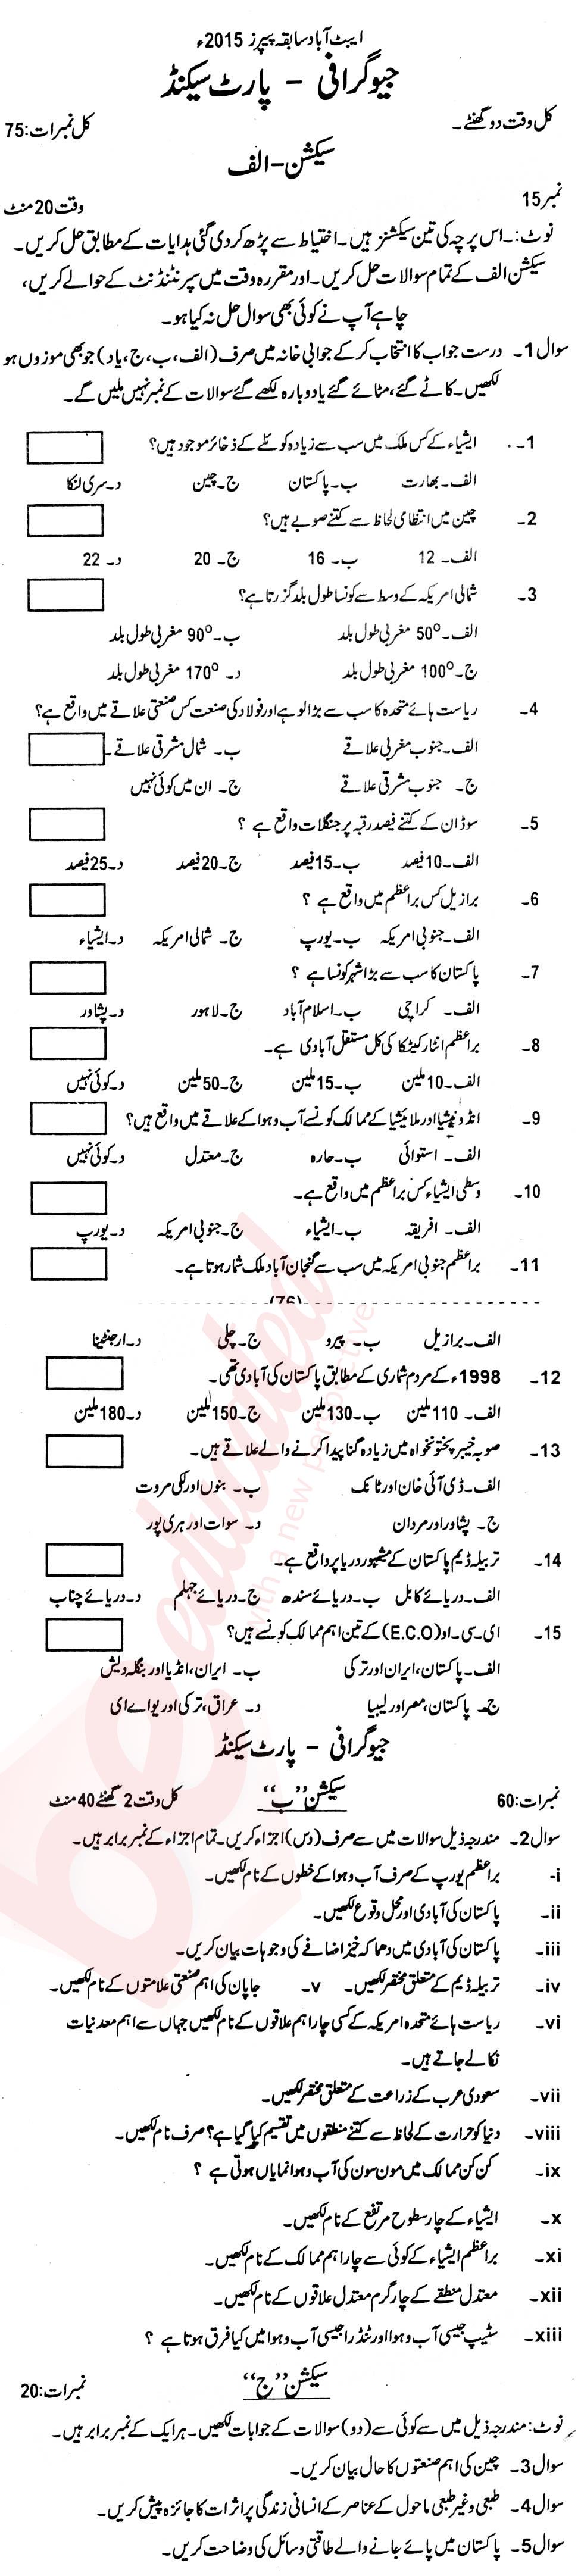 Commercial Geography FA Part 2 Past Paper Group 1 BISE Abbottabad 2015